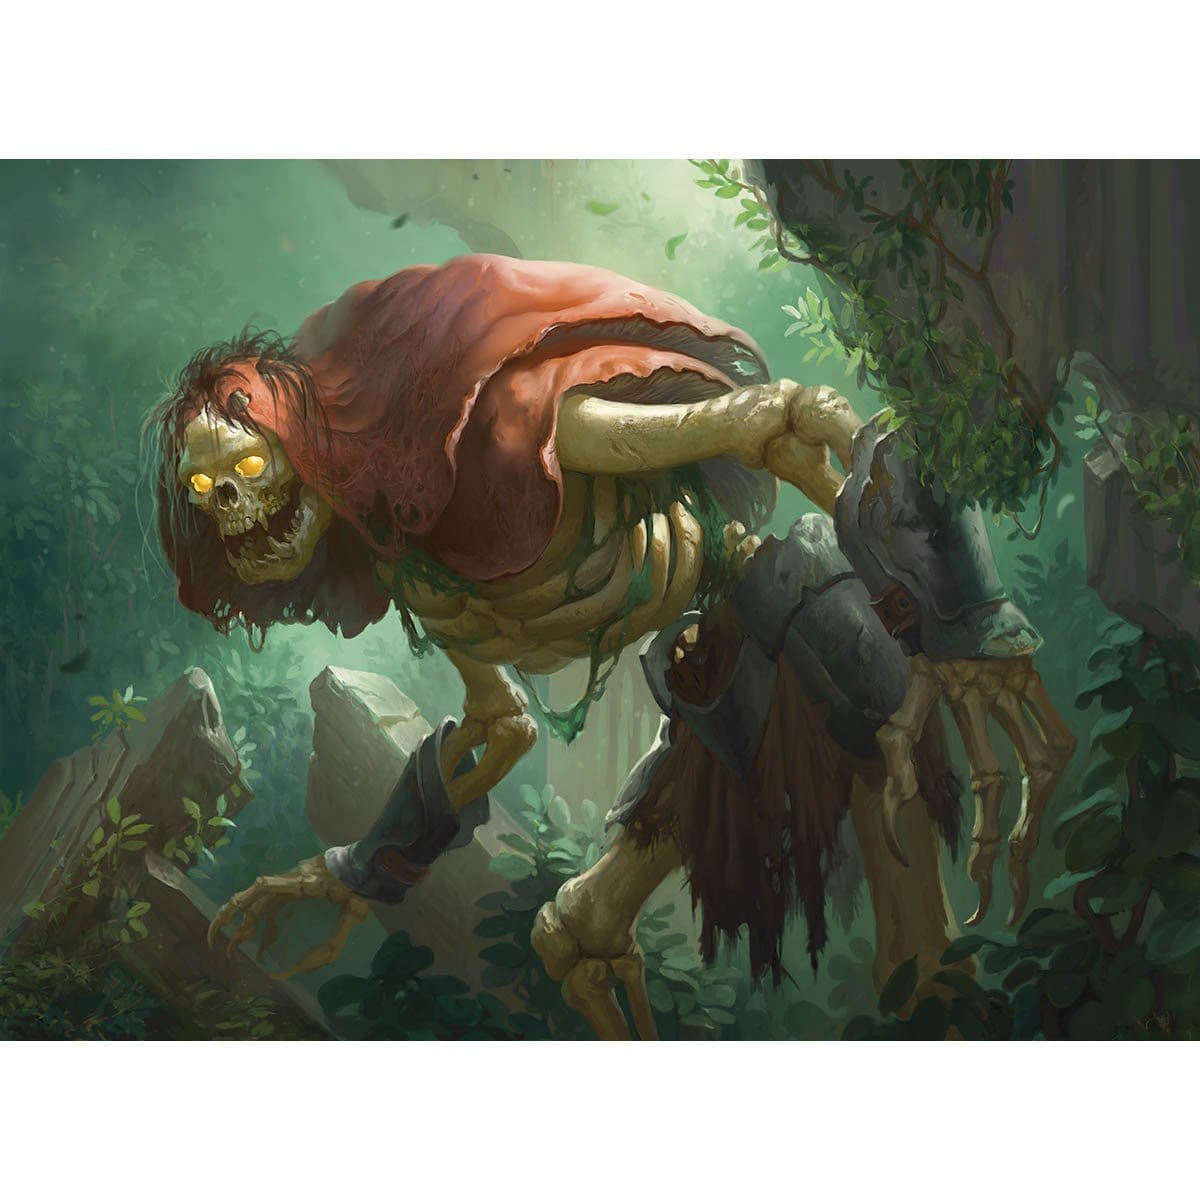 Golgari Grave-Troll Print - Print - Original Magic Art - Accessories for Magic the Gathering and other card games